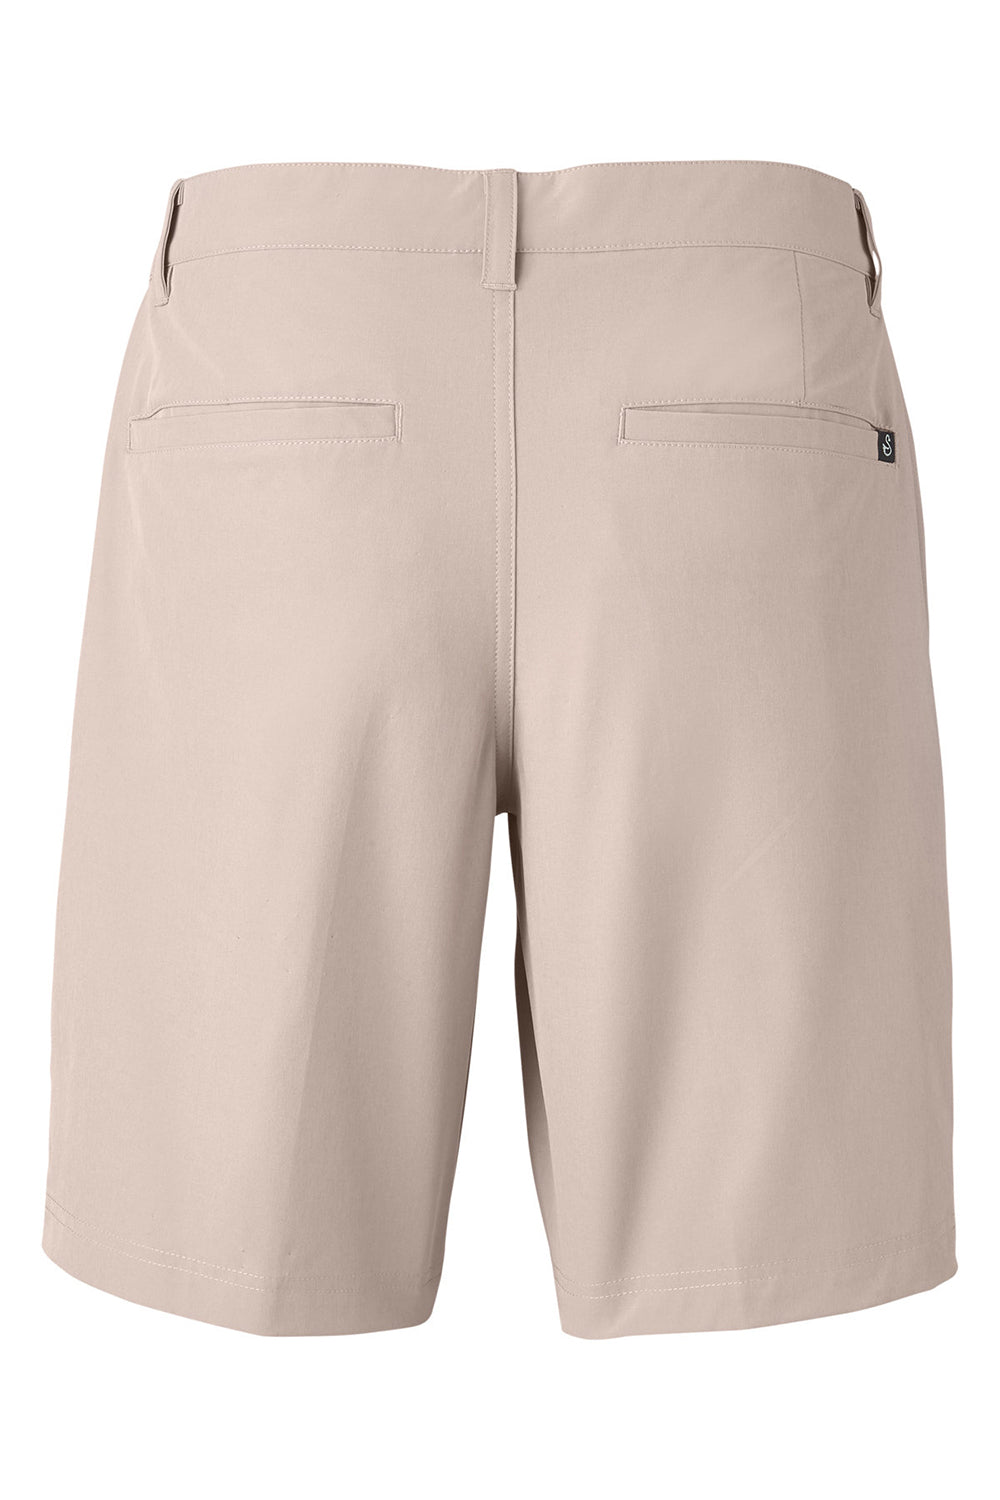 Swannies Golf SWS700 Mens Sully Shorts w/ Pockets Tan Flat Back